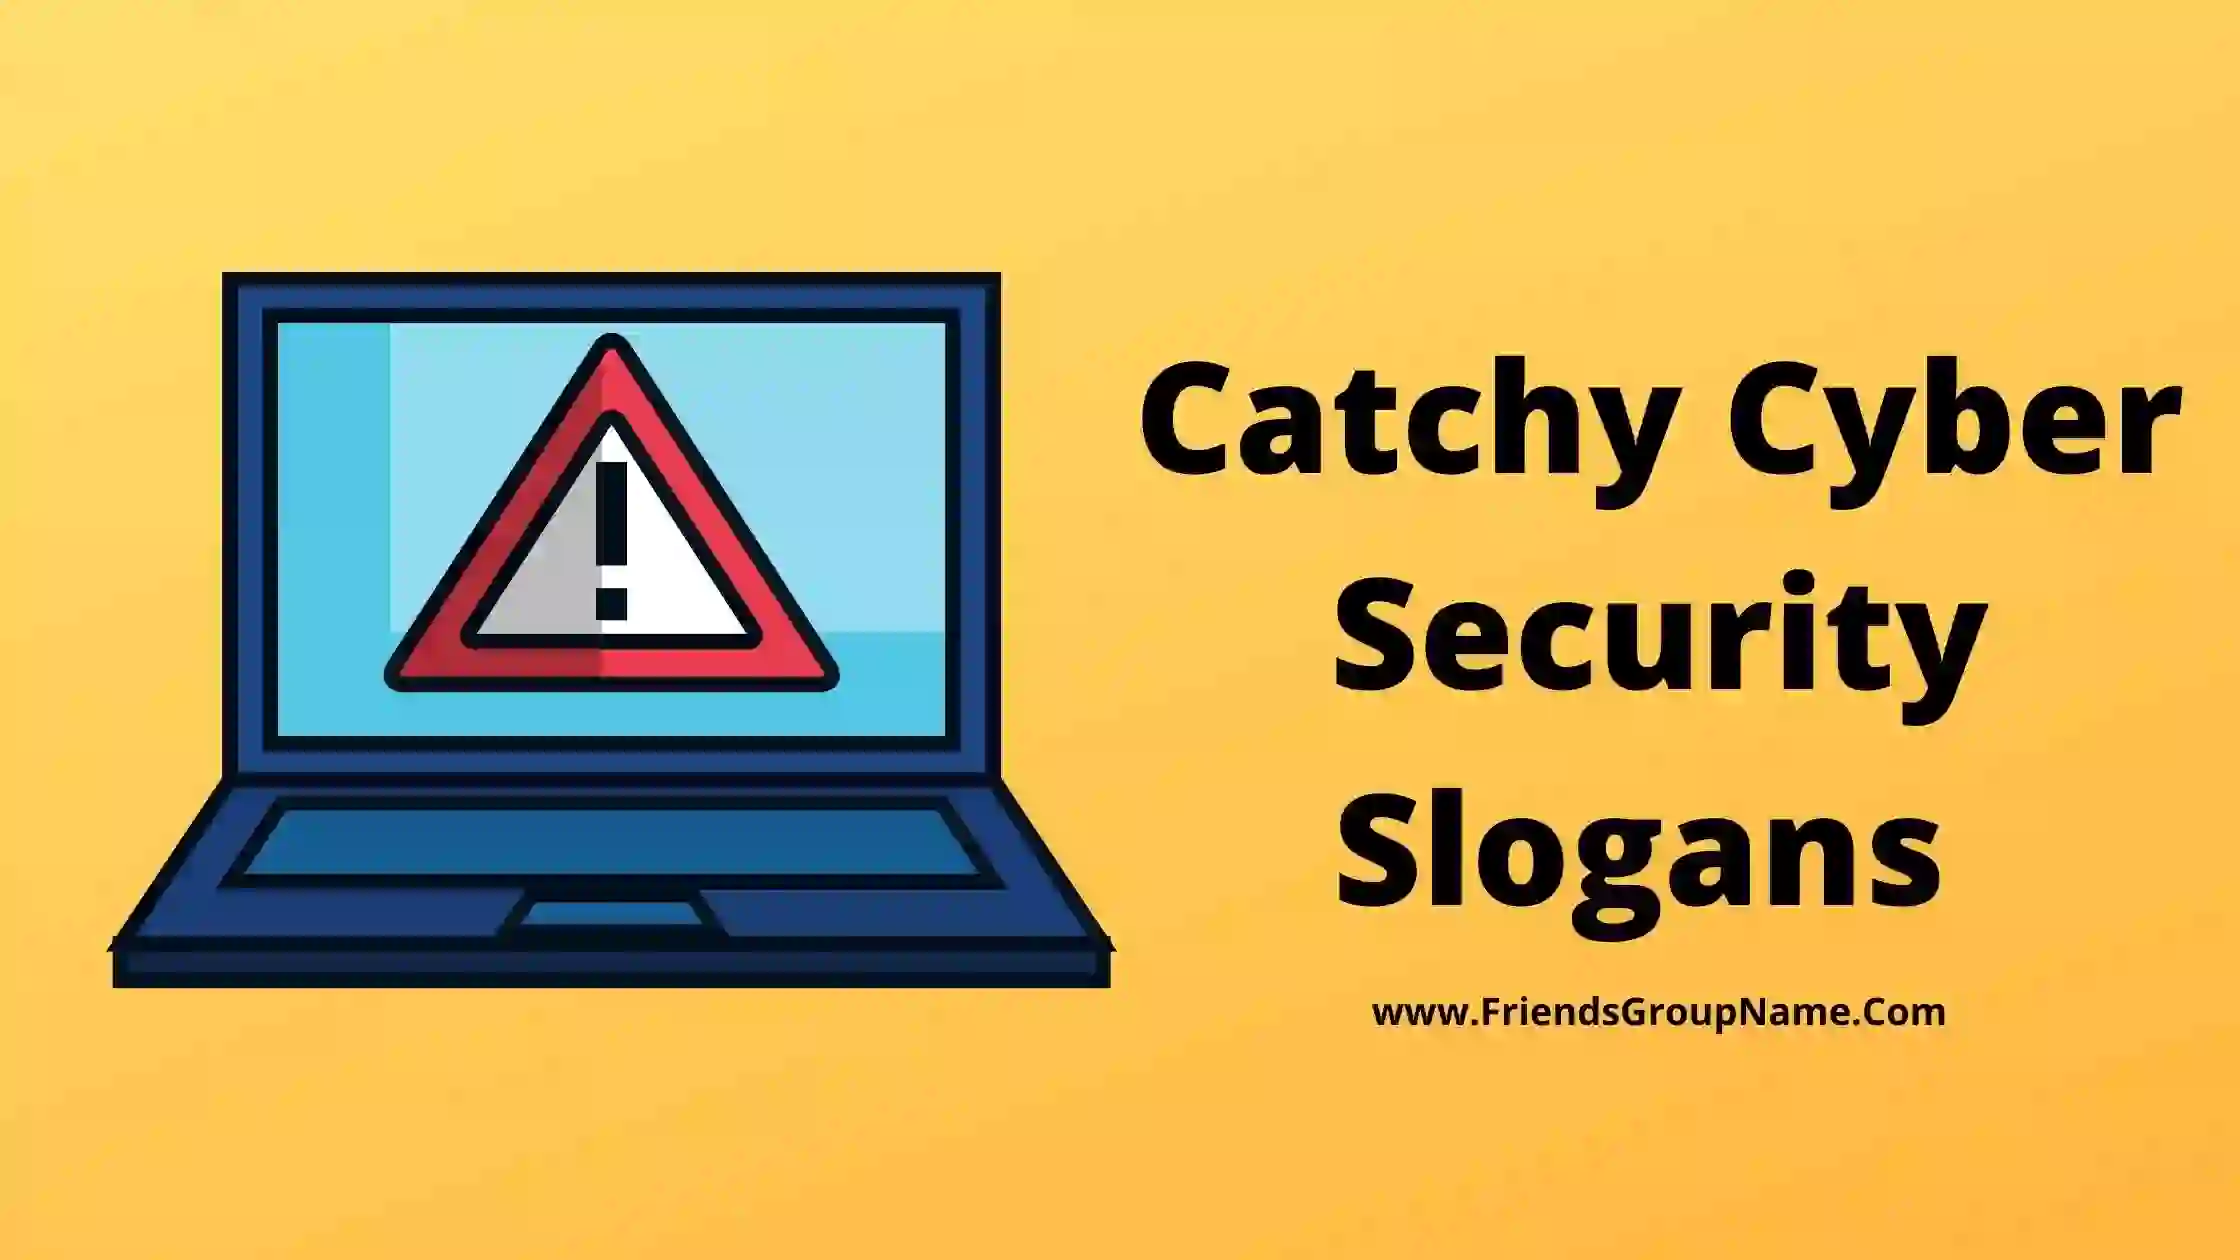 Catchy Cyber Security Slogans